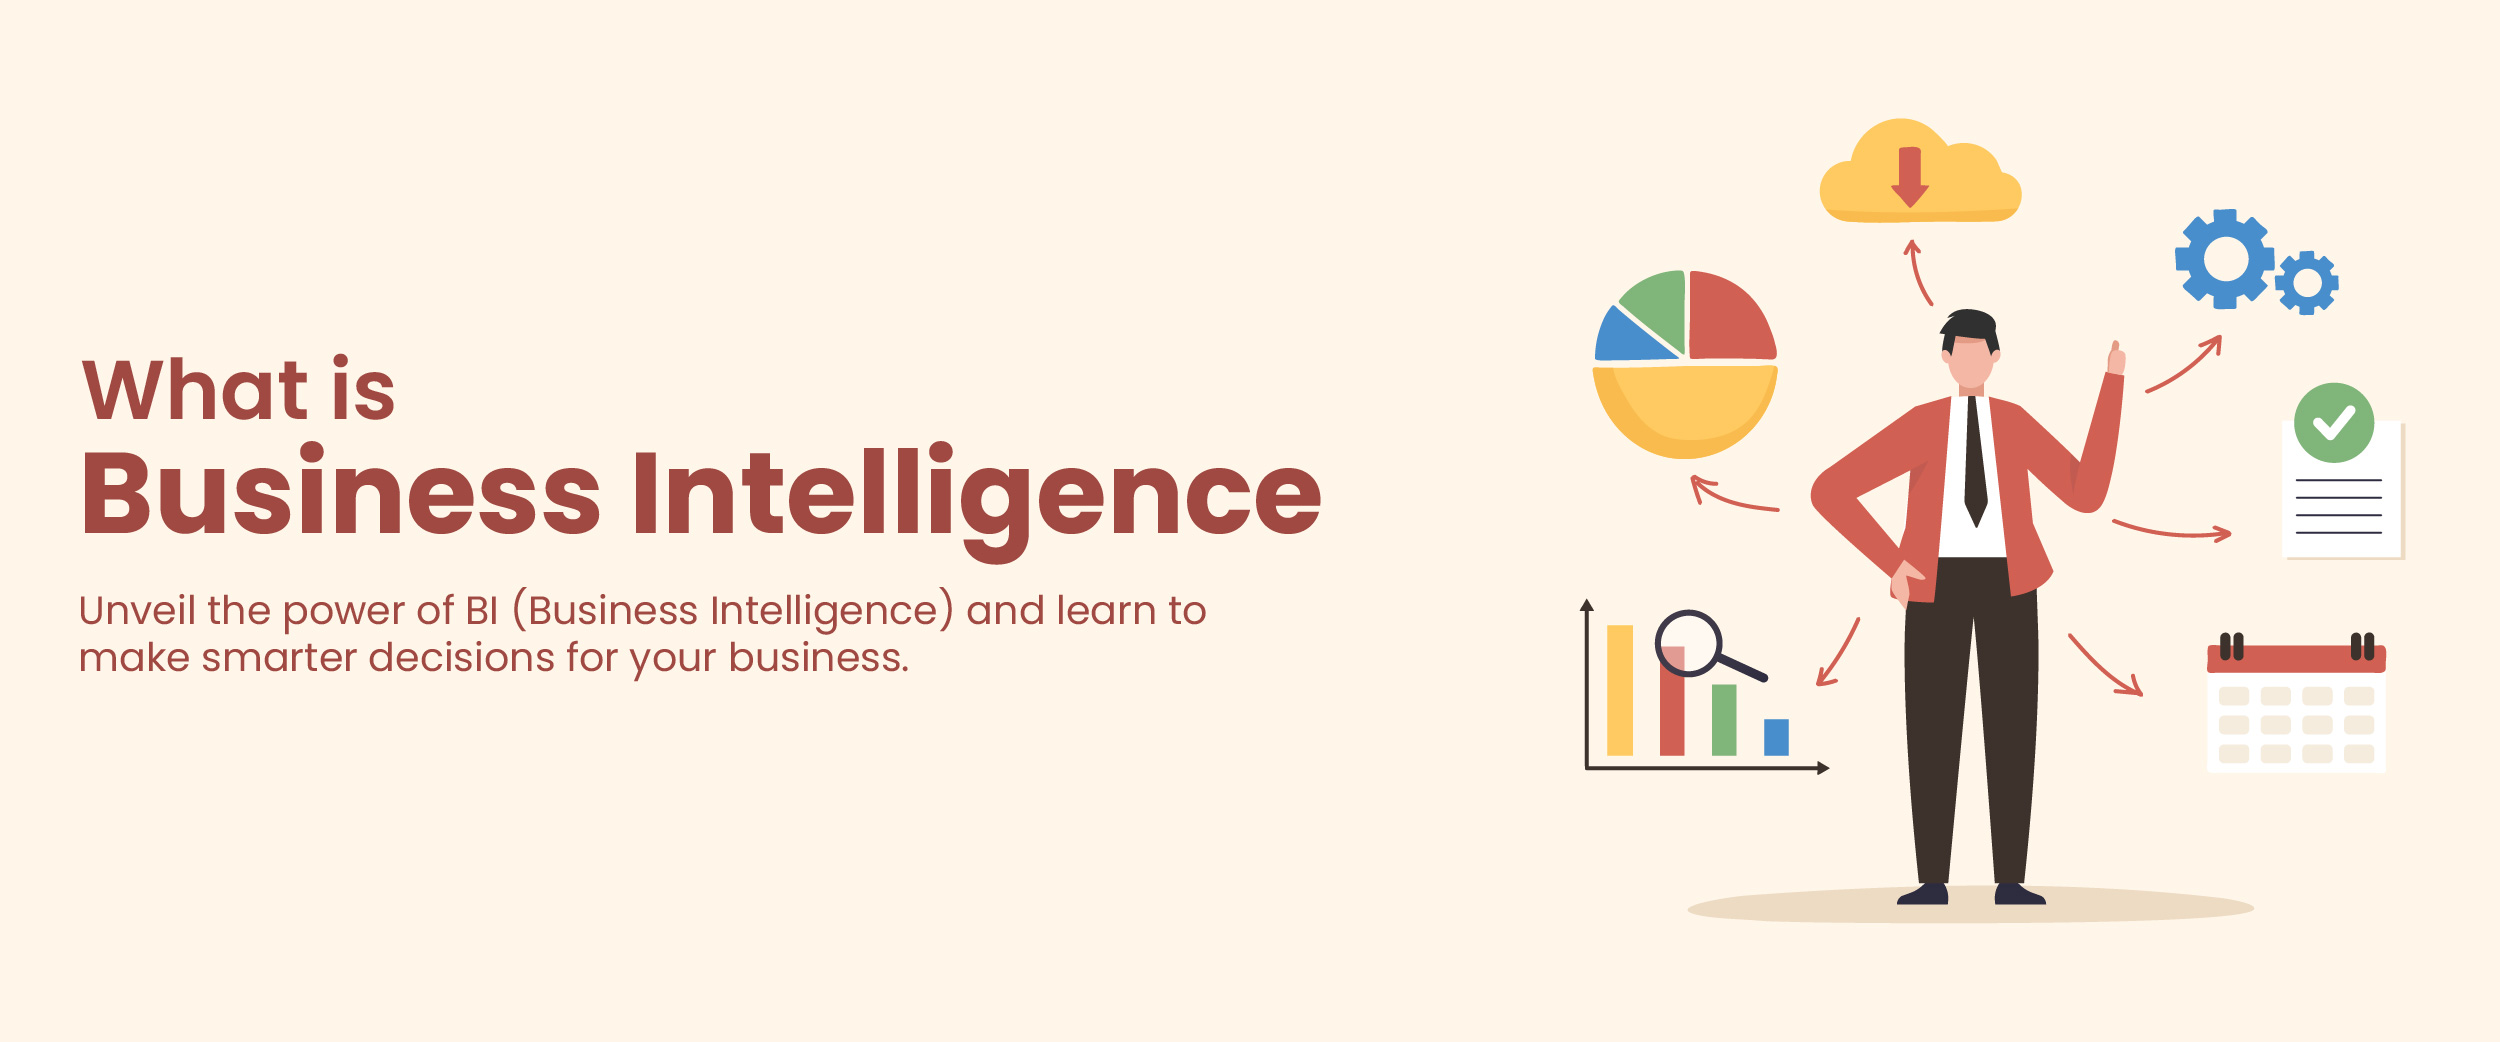 business intelligence meaning